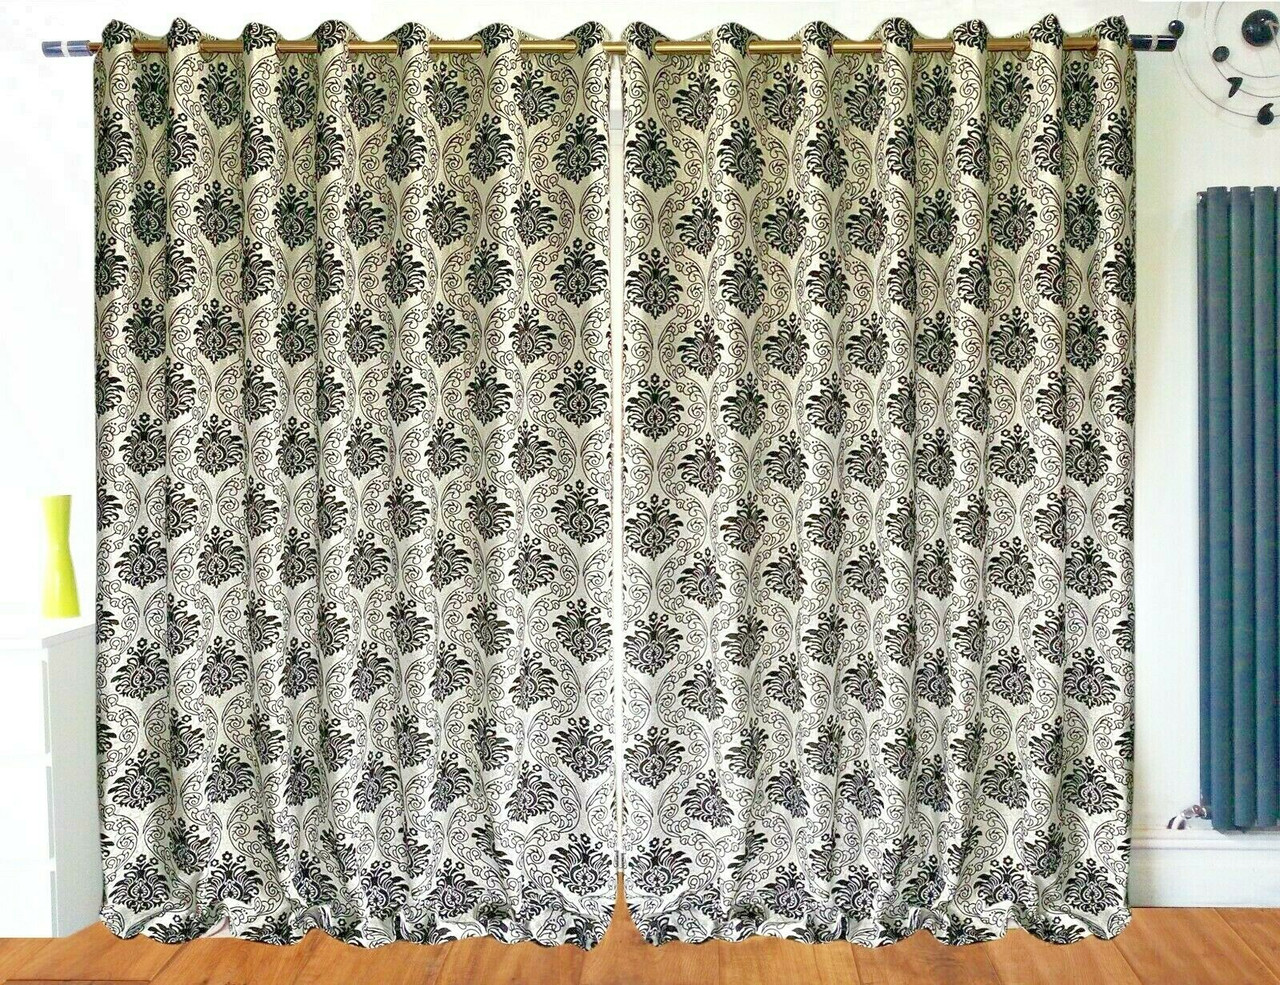 Eyelet Curtains Ring top Black White Flocked Damask Fully Lined Curtains 90"X90"